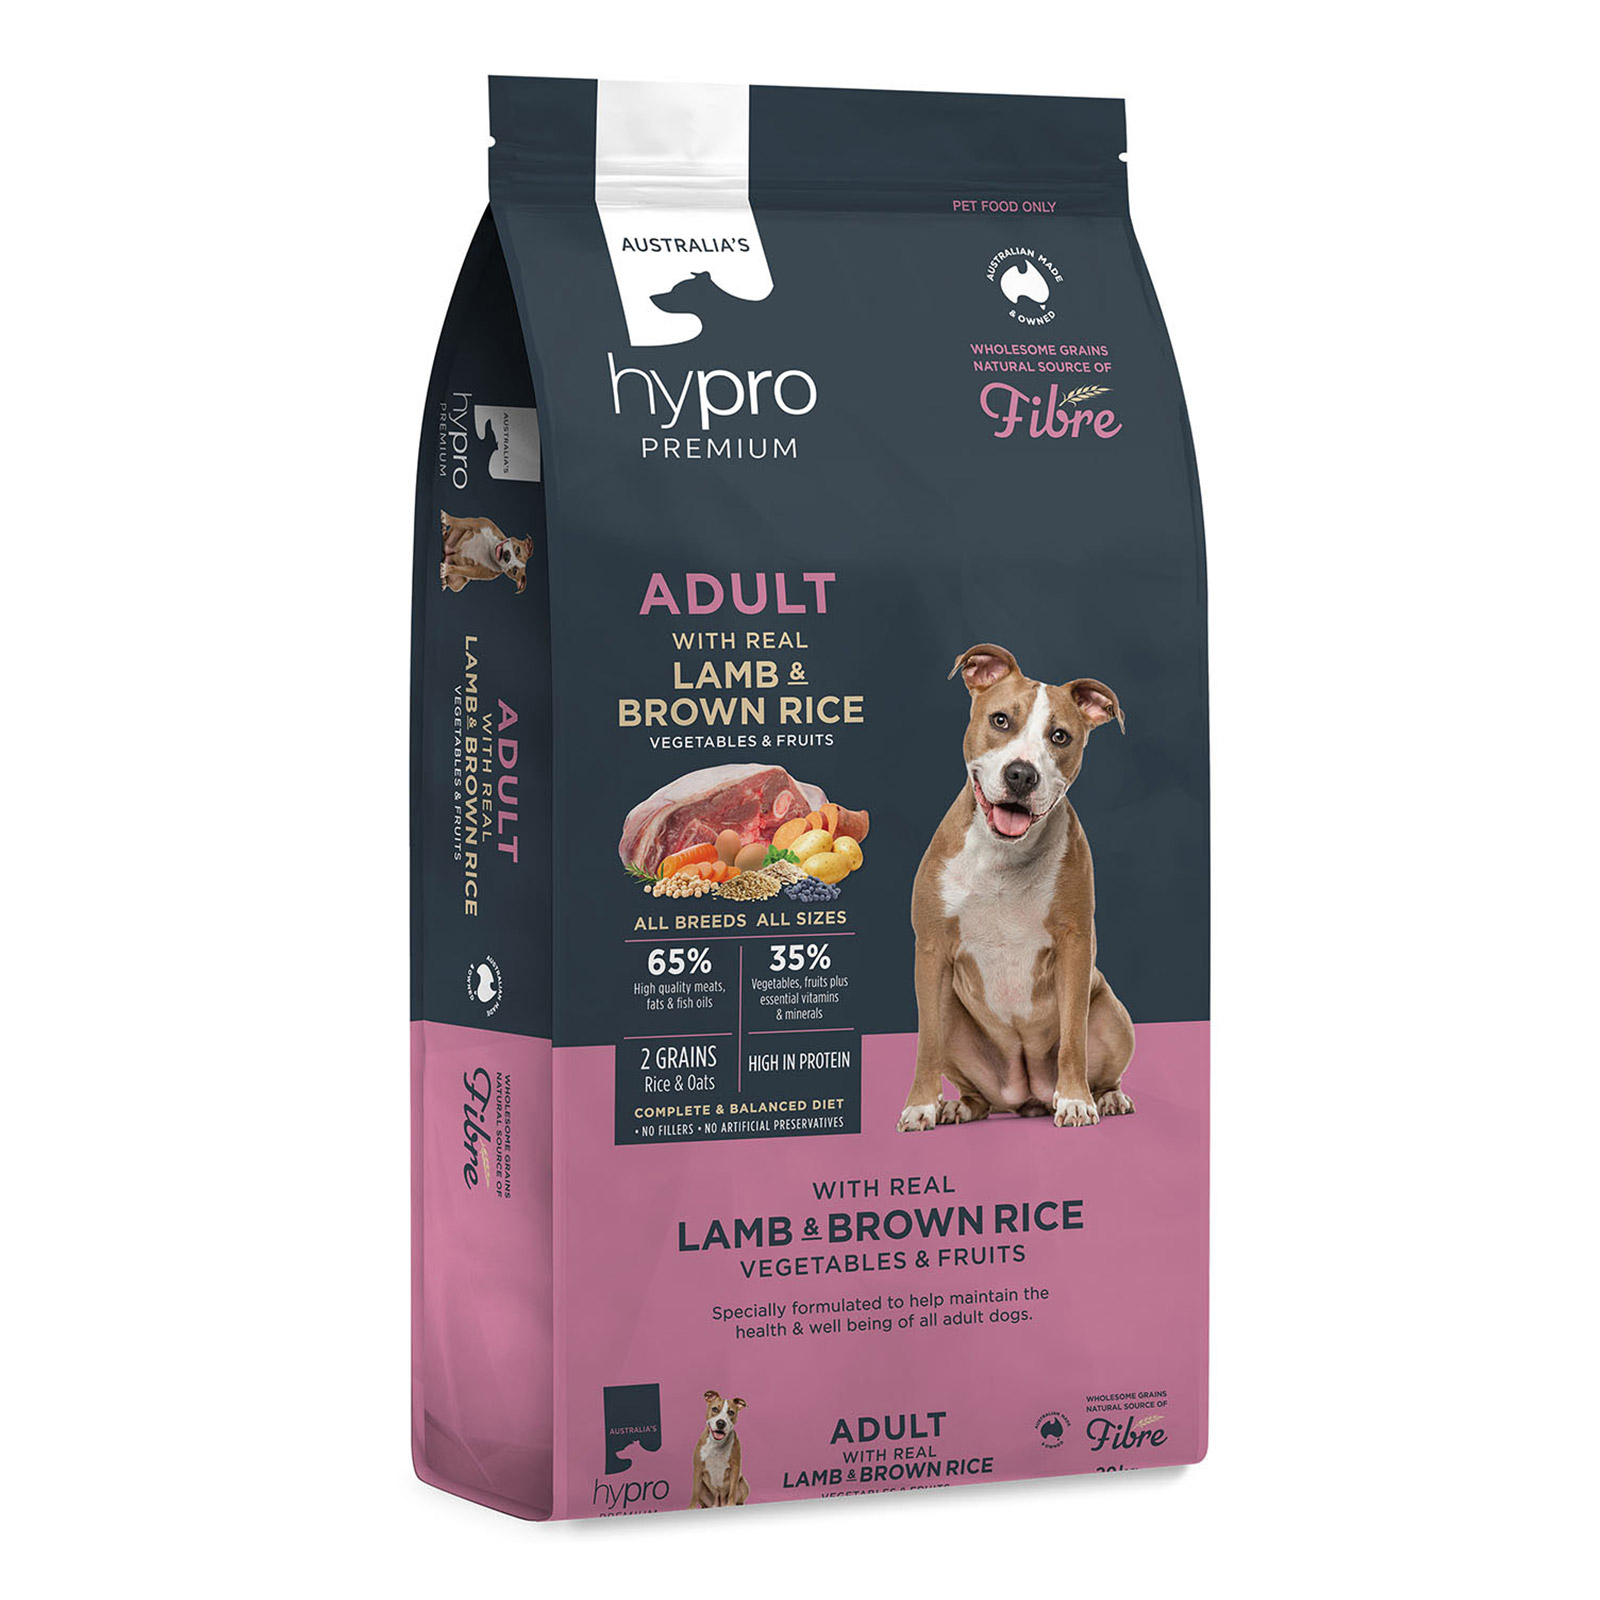 Hypro Premium Wholesome Grains Adult Dog Food (Lamb & Brown Rice) for Food